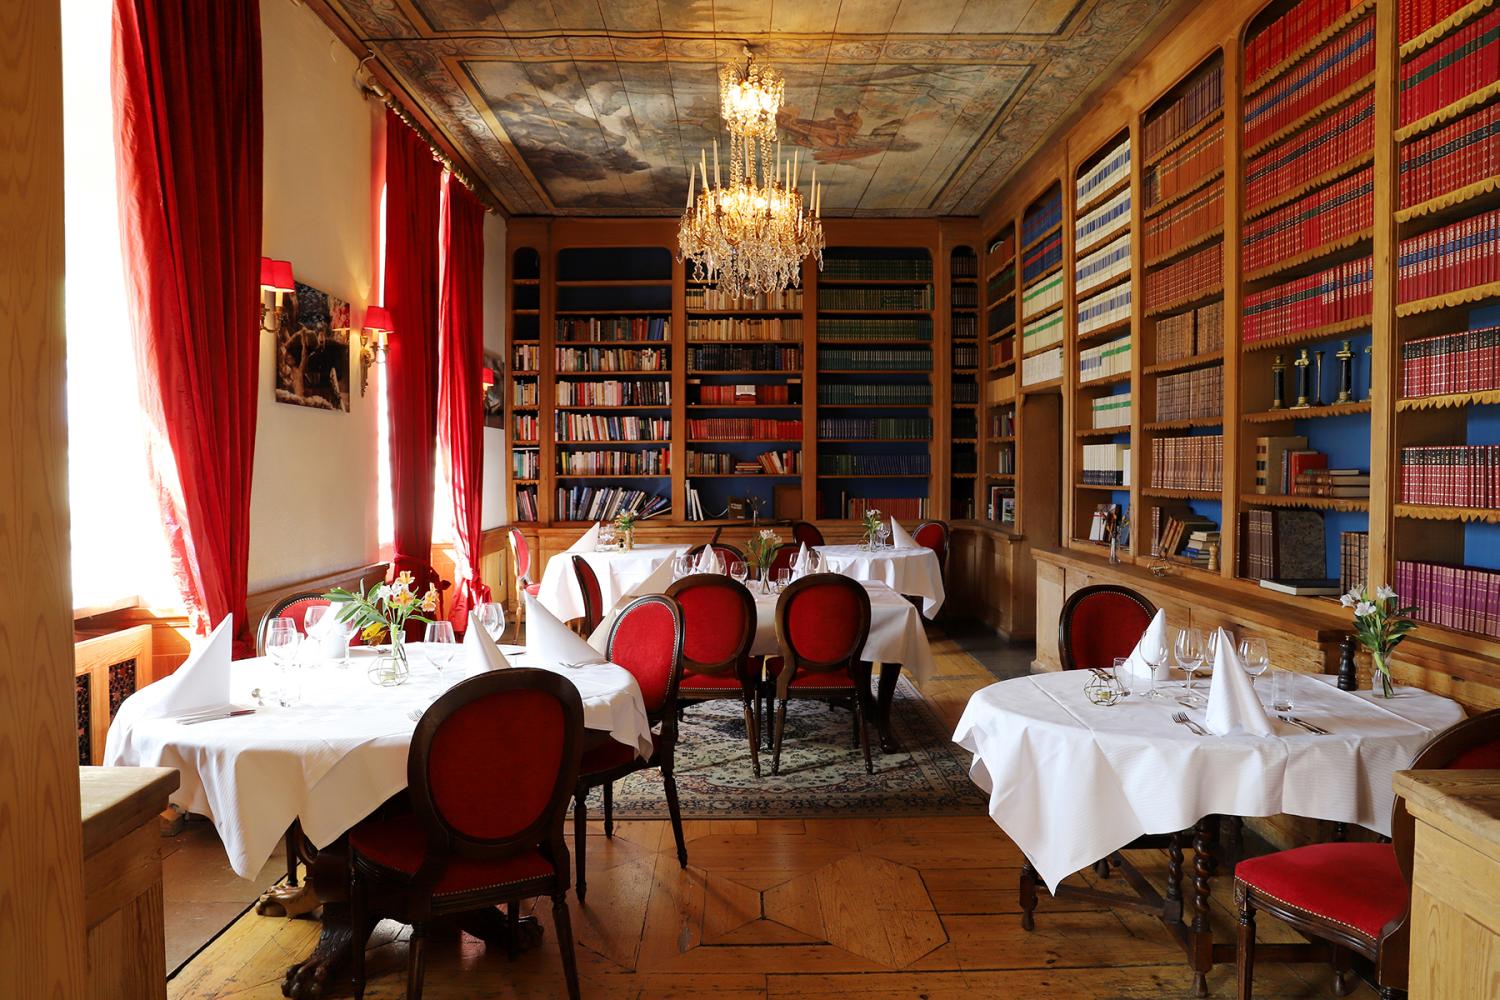 The library, dining room, Häringe Palace